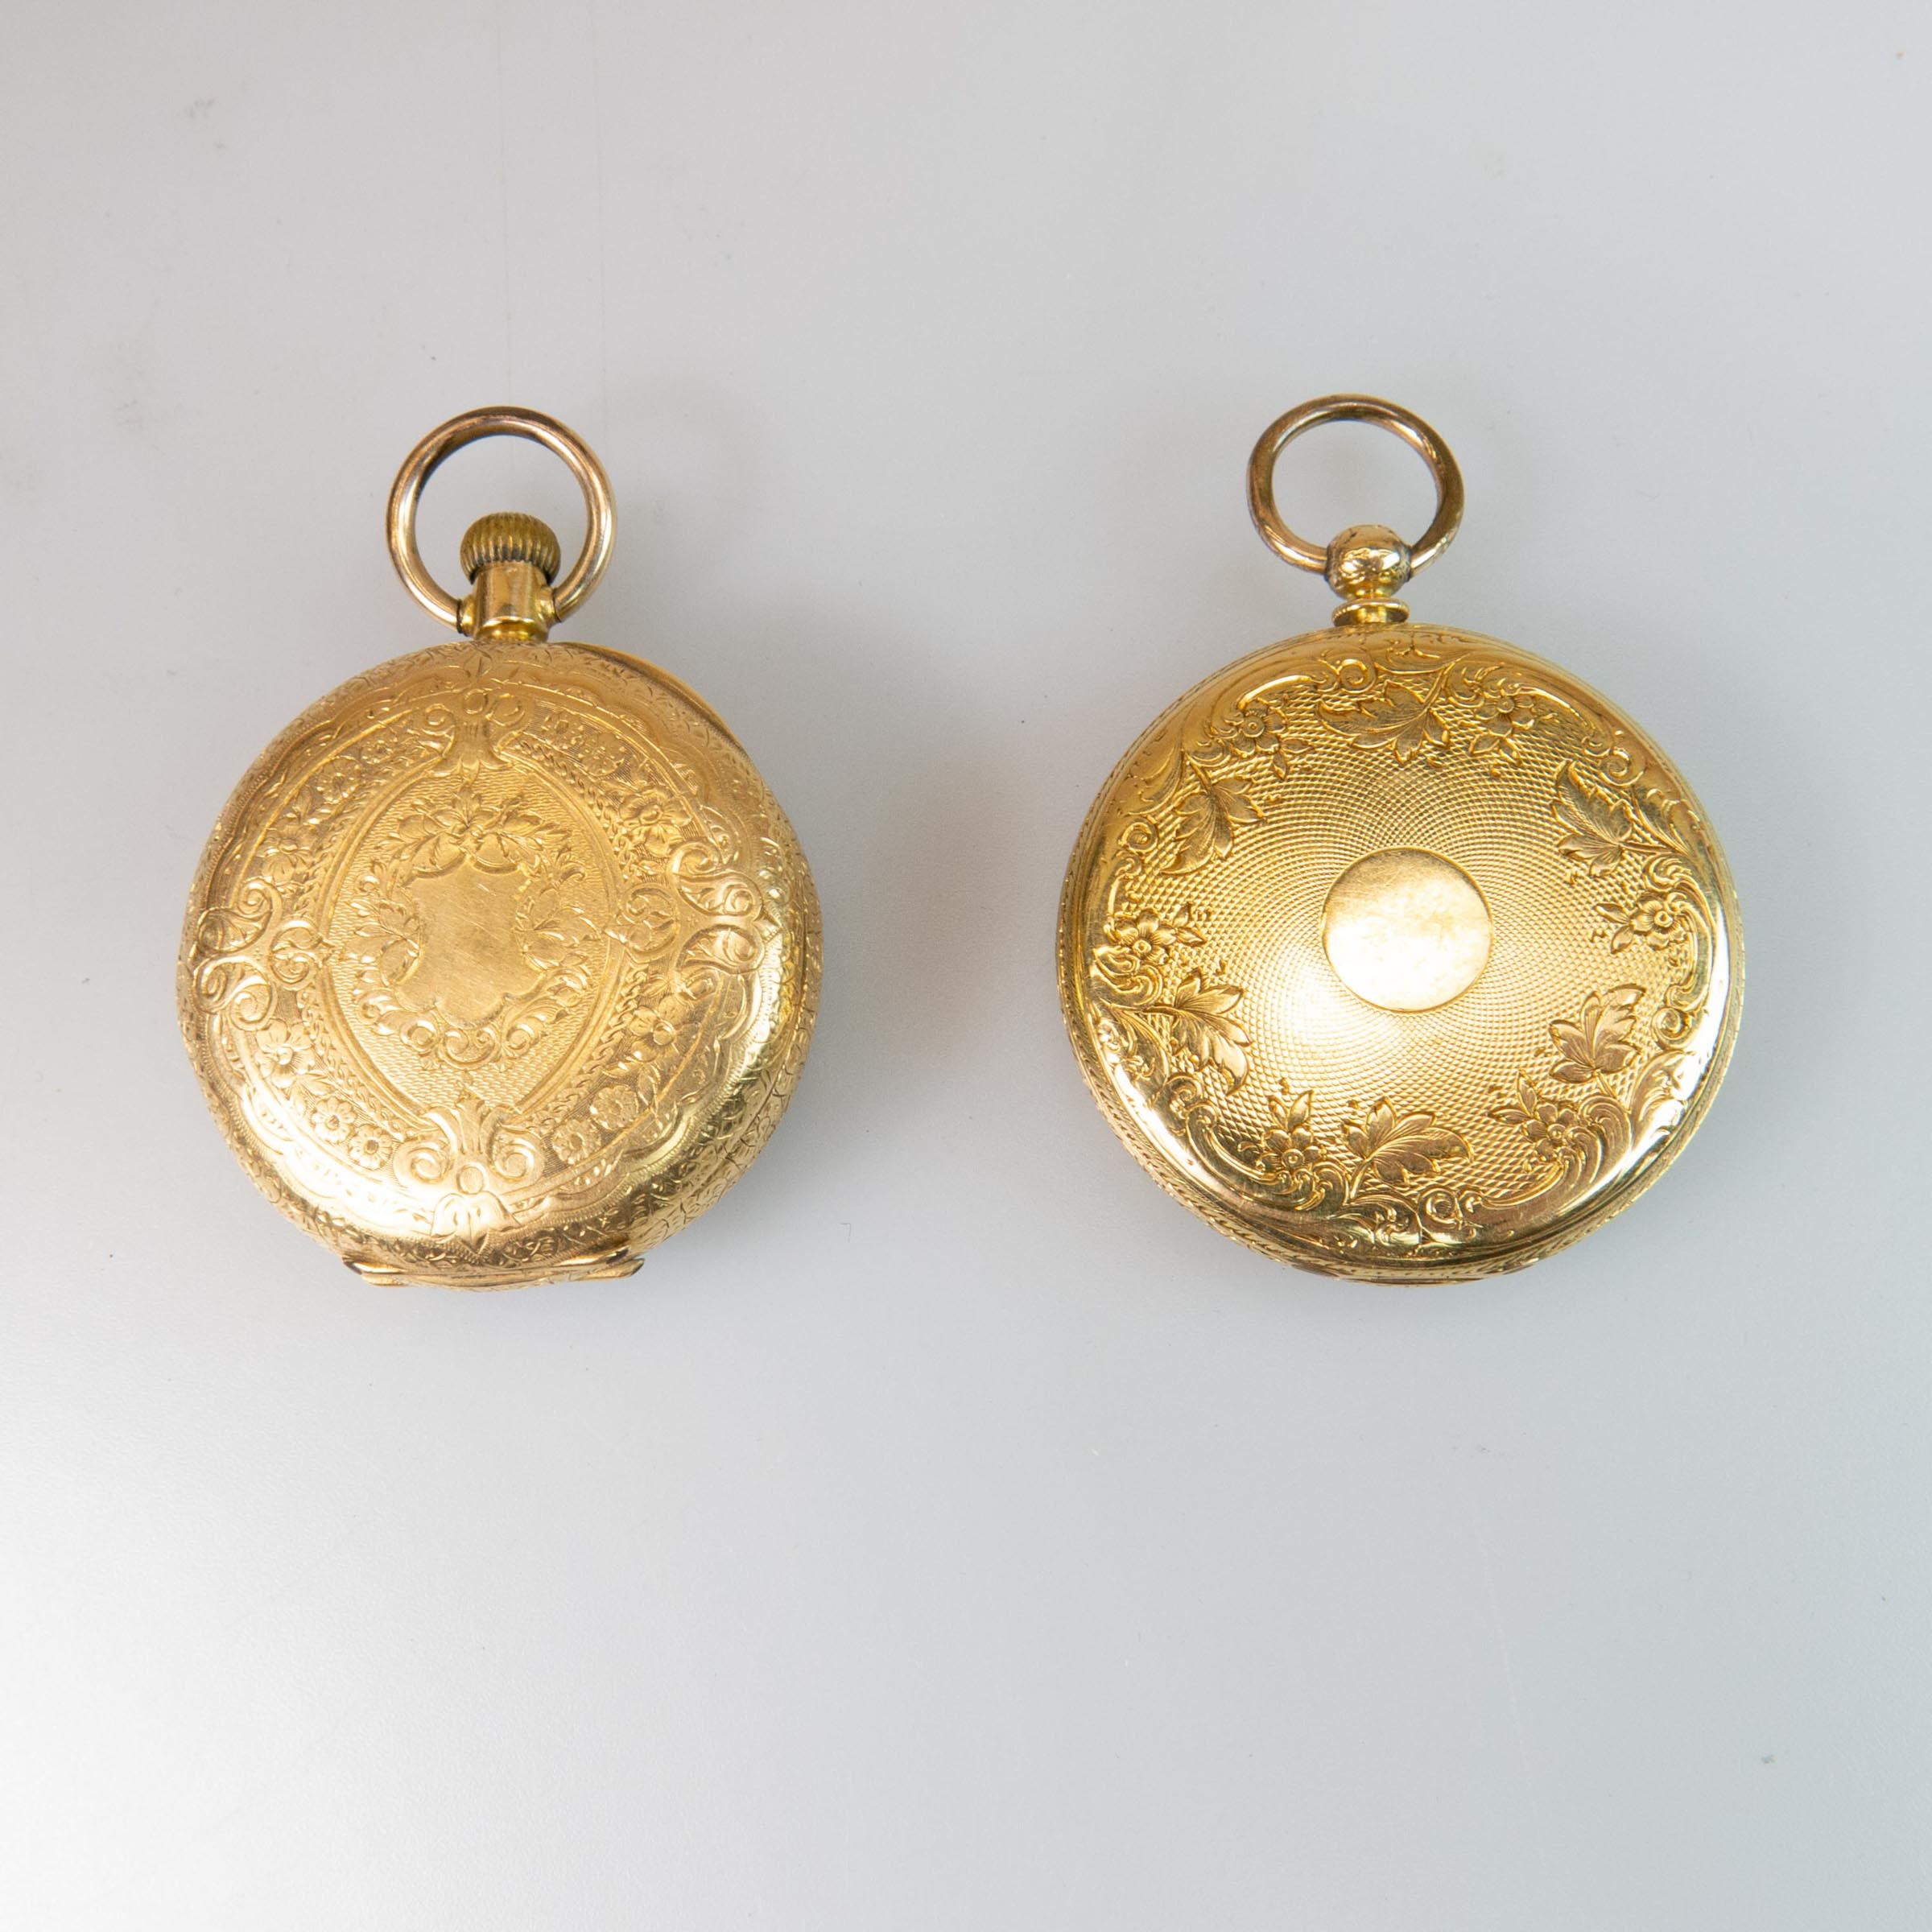 Two Openface Pocket Watches In 18k Yellow Gold Cases